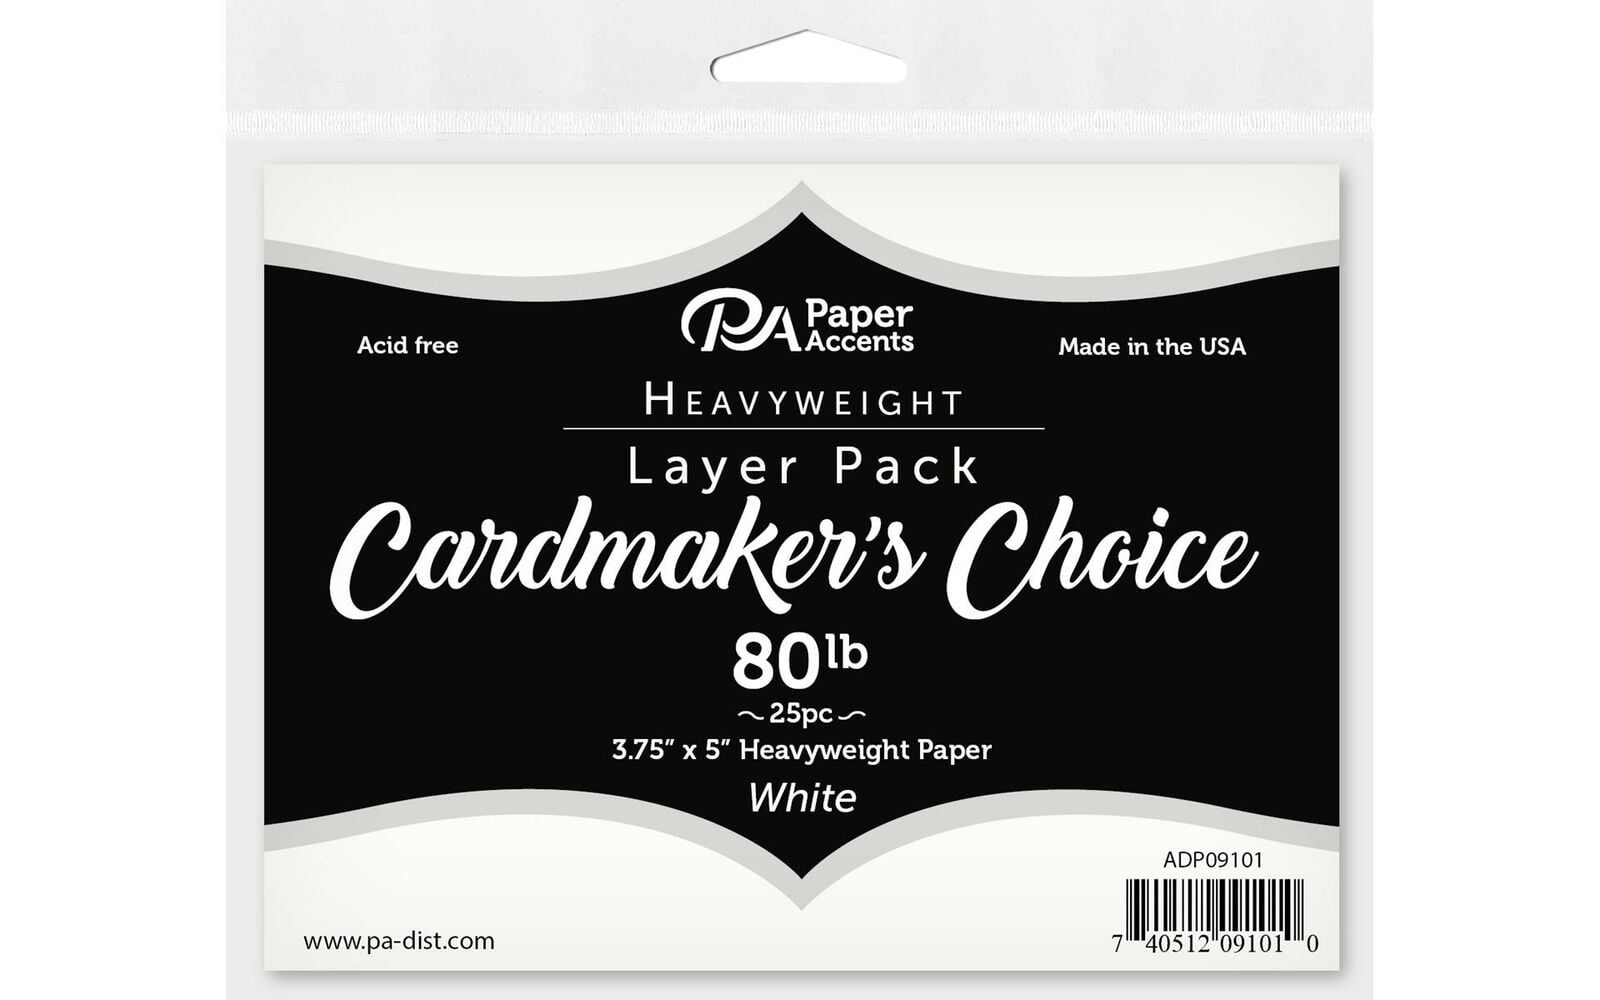 ADP09101 CARDMAKERS CHOICE CARD LAYER 3 75X5 80LB WHT 25PC 